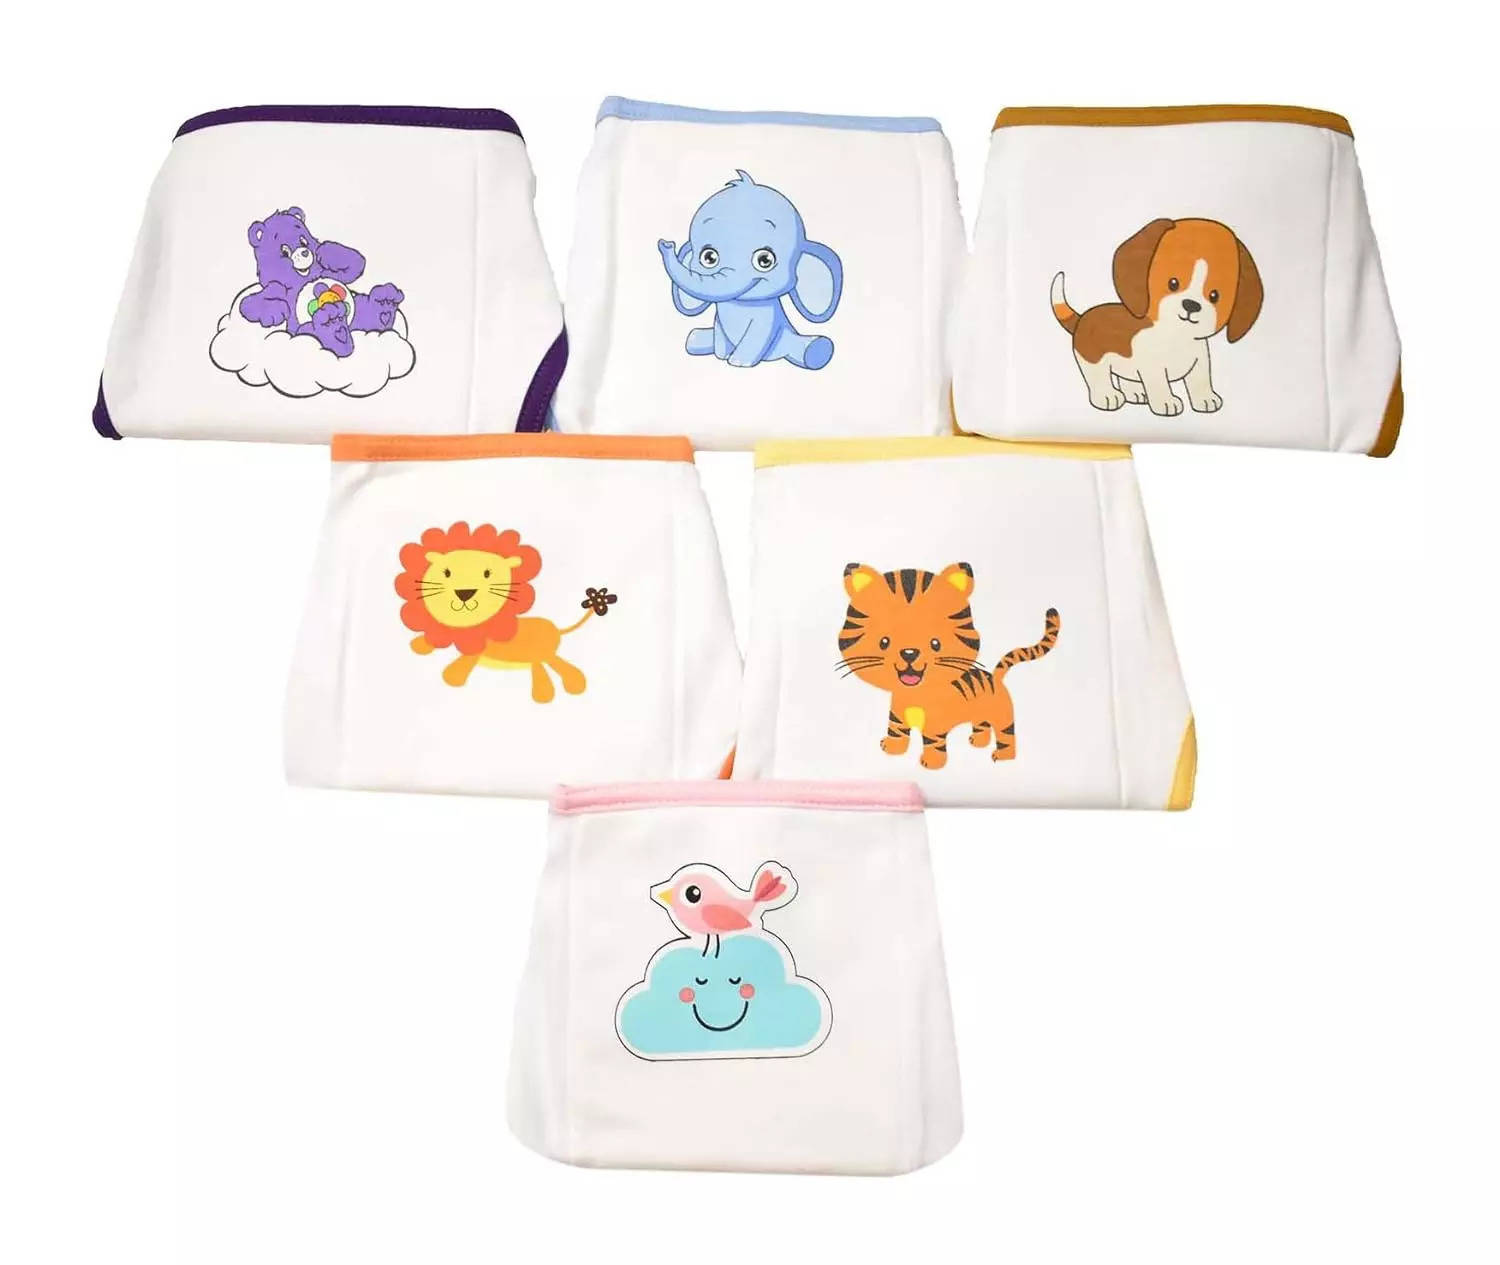 Super comfy nappies for kids: Allow your baby’s skin to breathe:Image